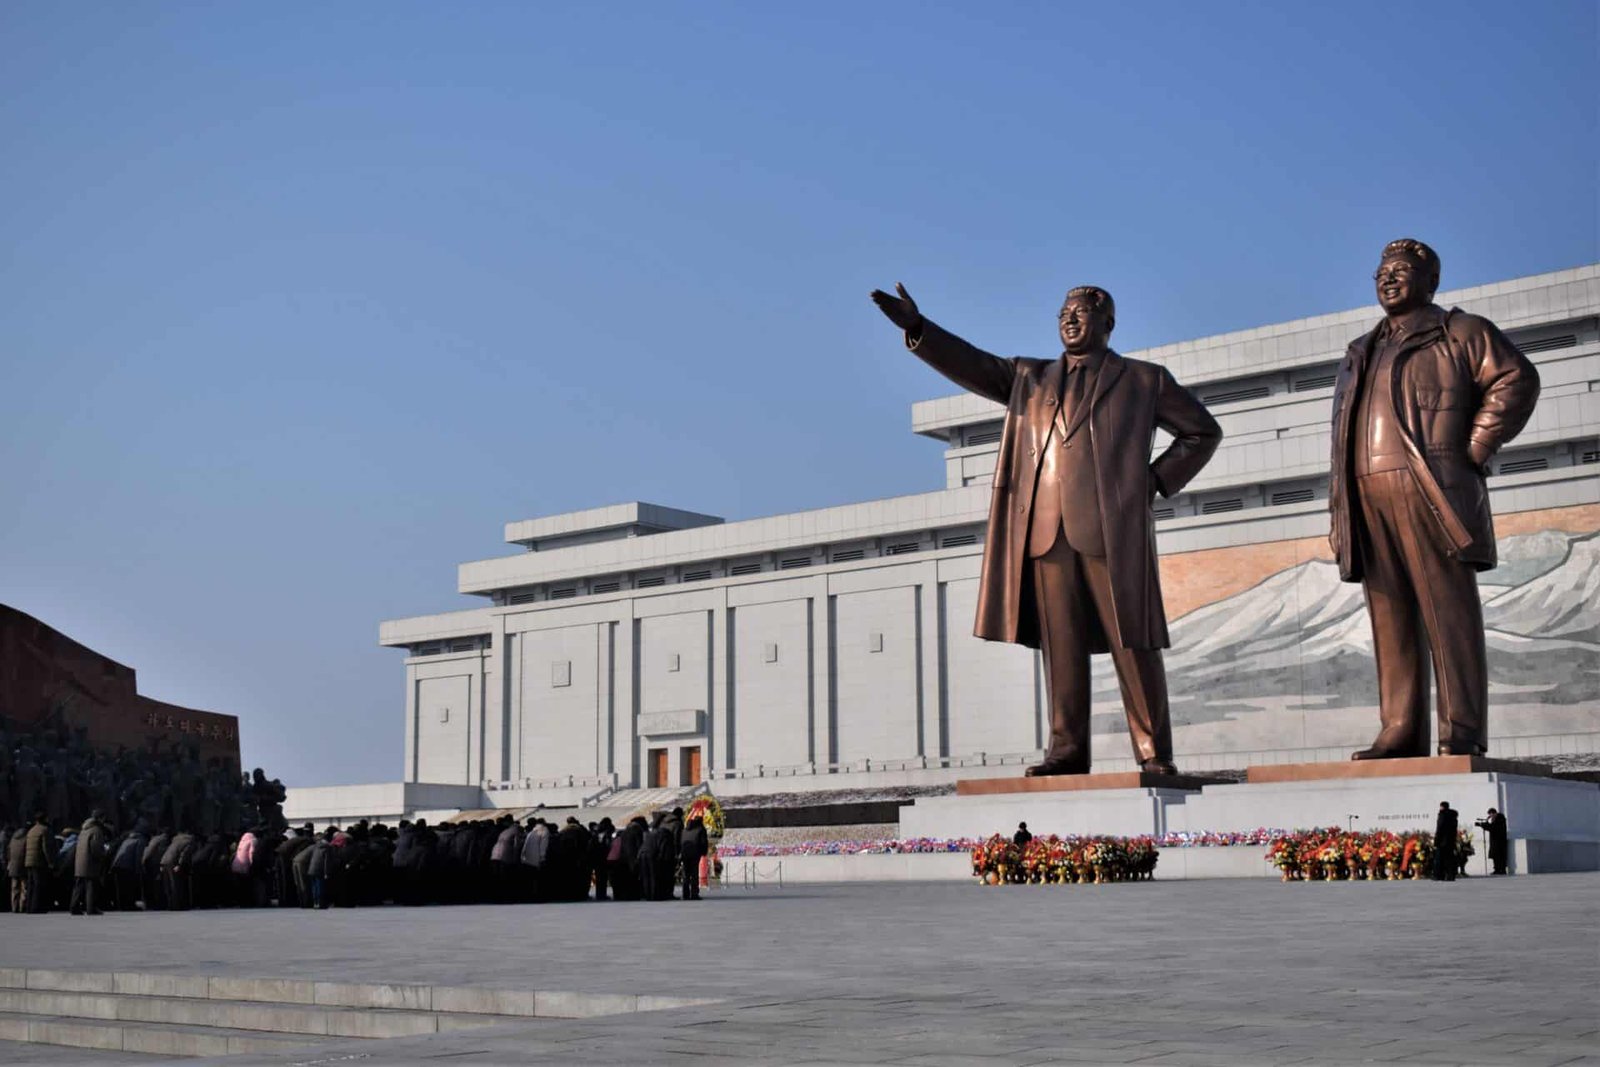 people bowing down and paying their respect in front of two giant bronze statues of former North Korean leaders Kim Il-sung and Kim Jong-il